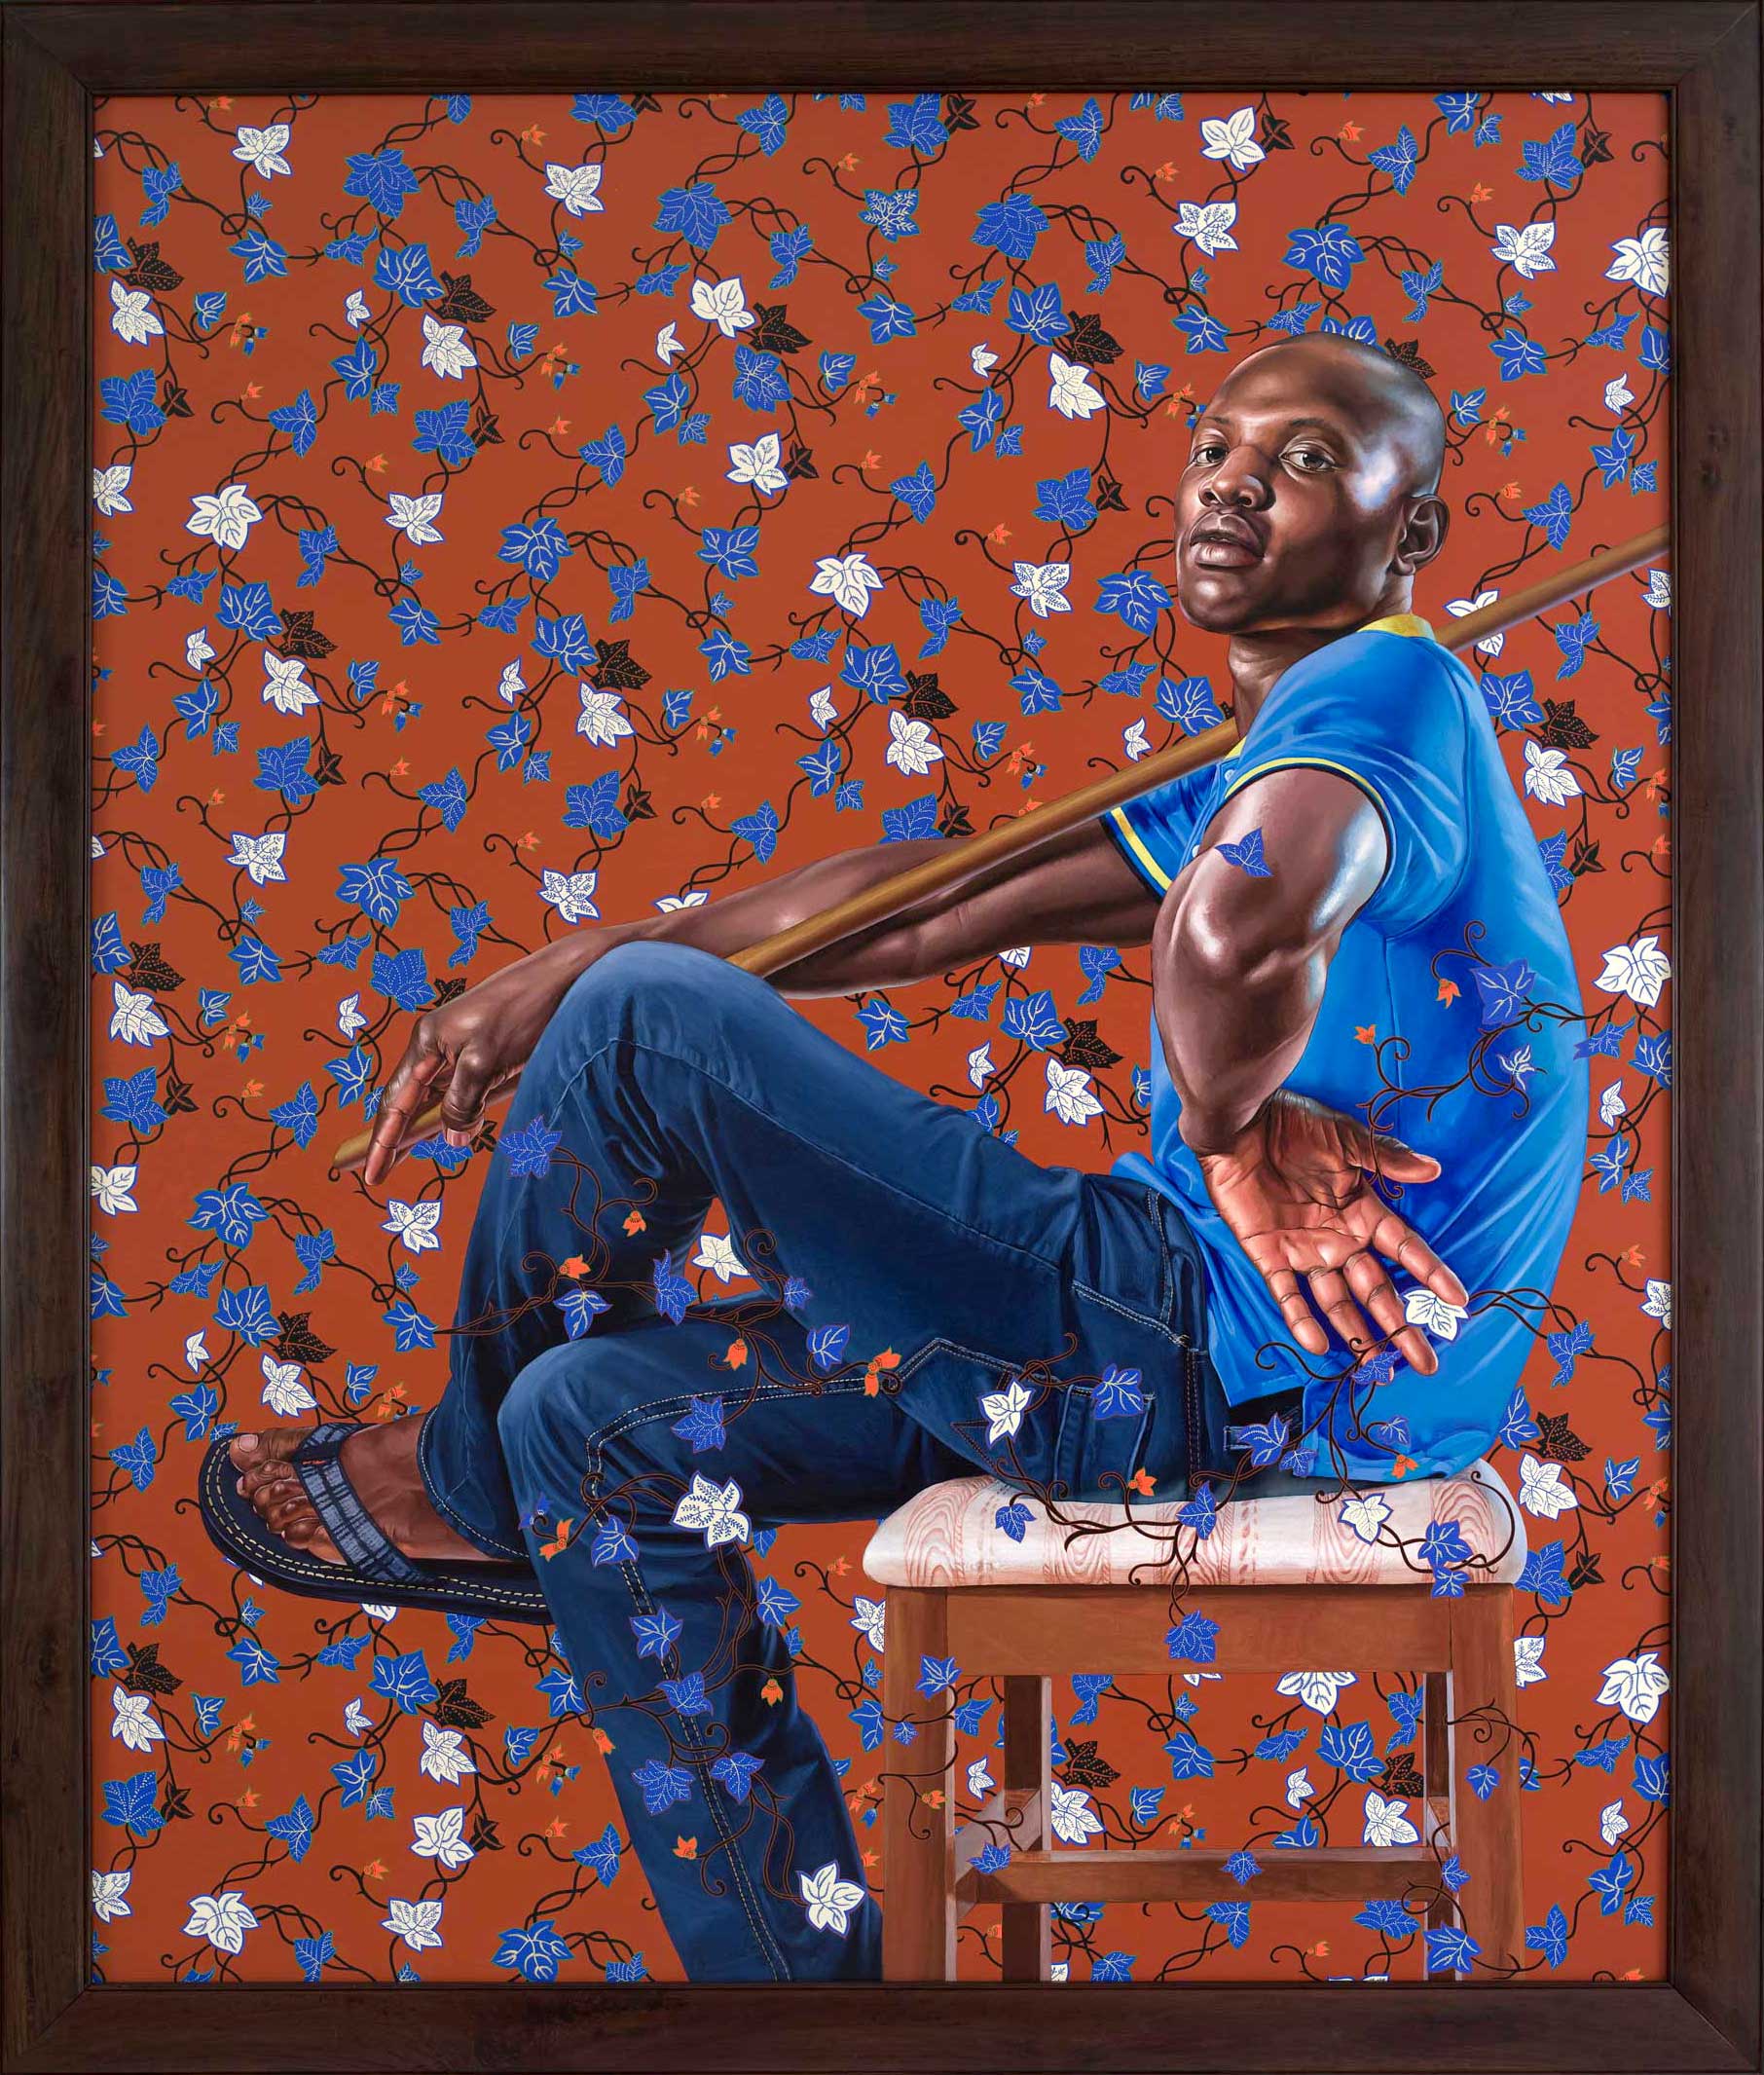 Kehinde Wiley | The World Stage: France | Monsieur Seriziat, 2012 Oil on Canvas. | 8